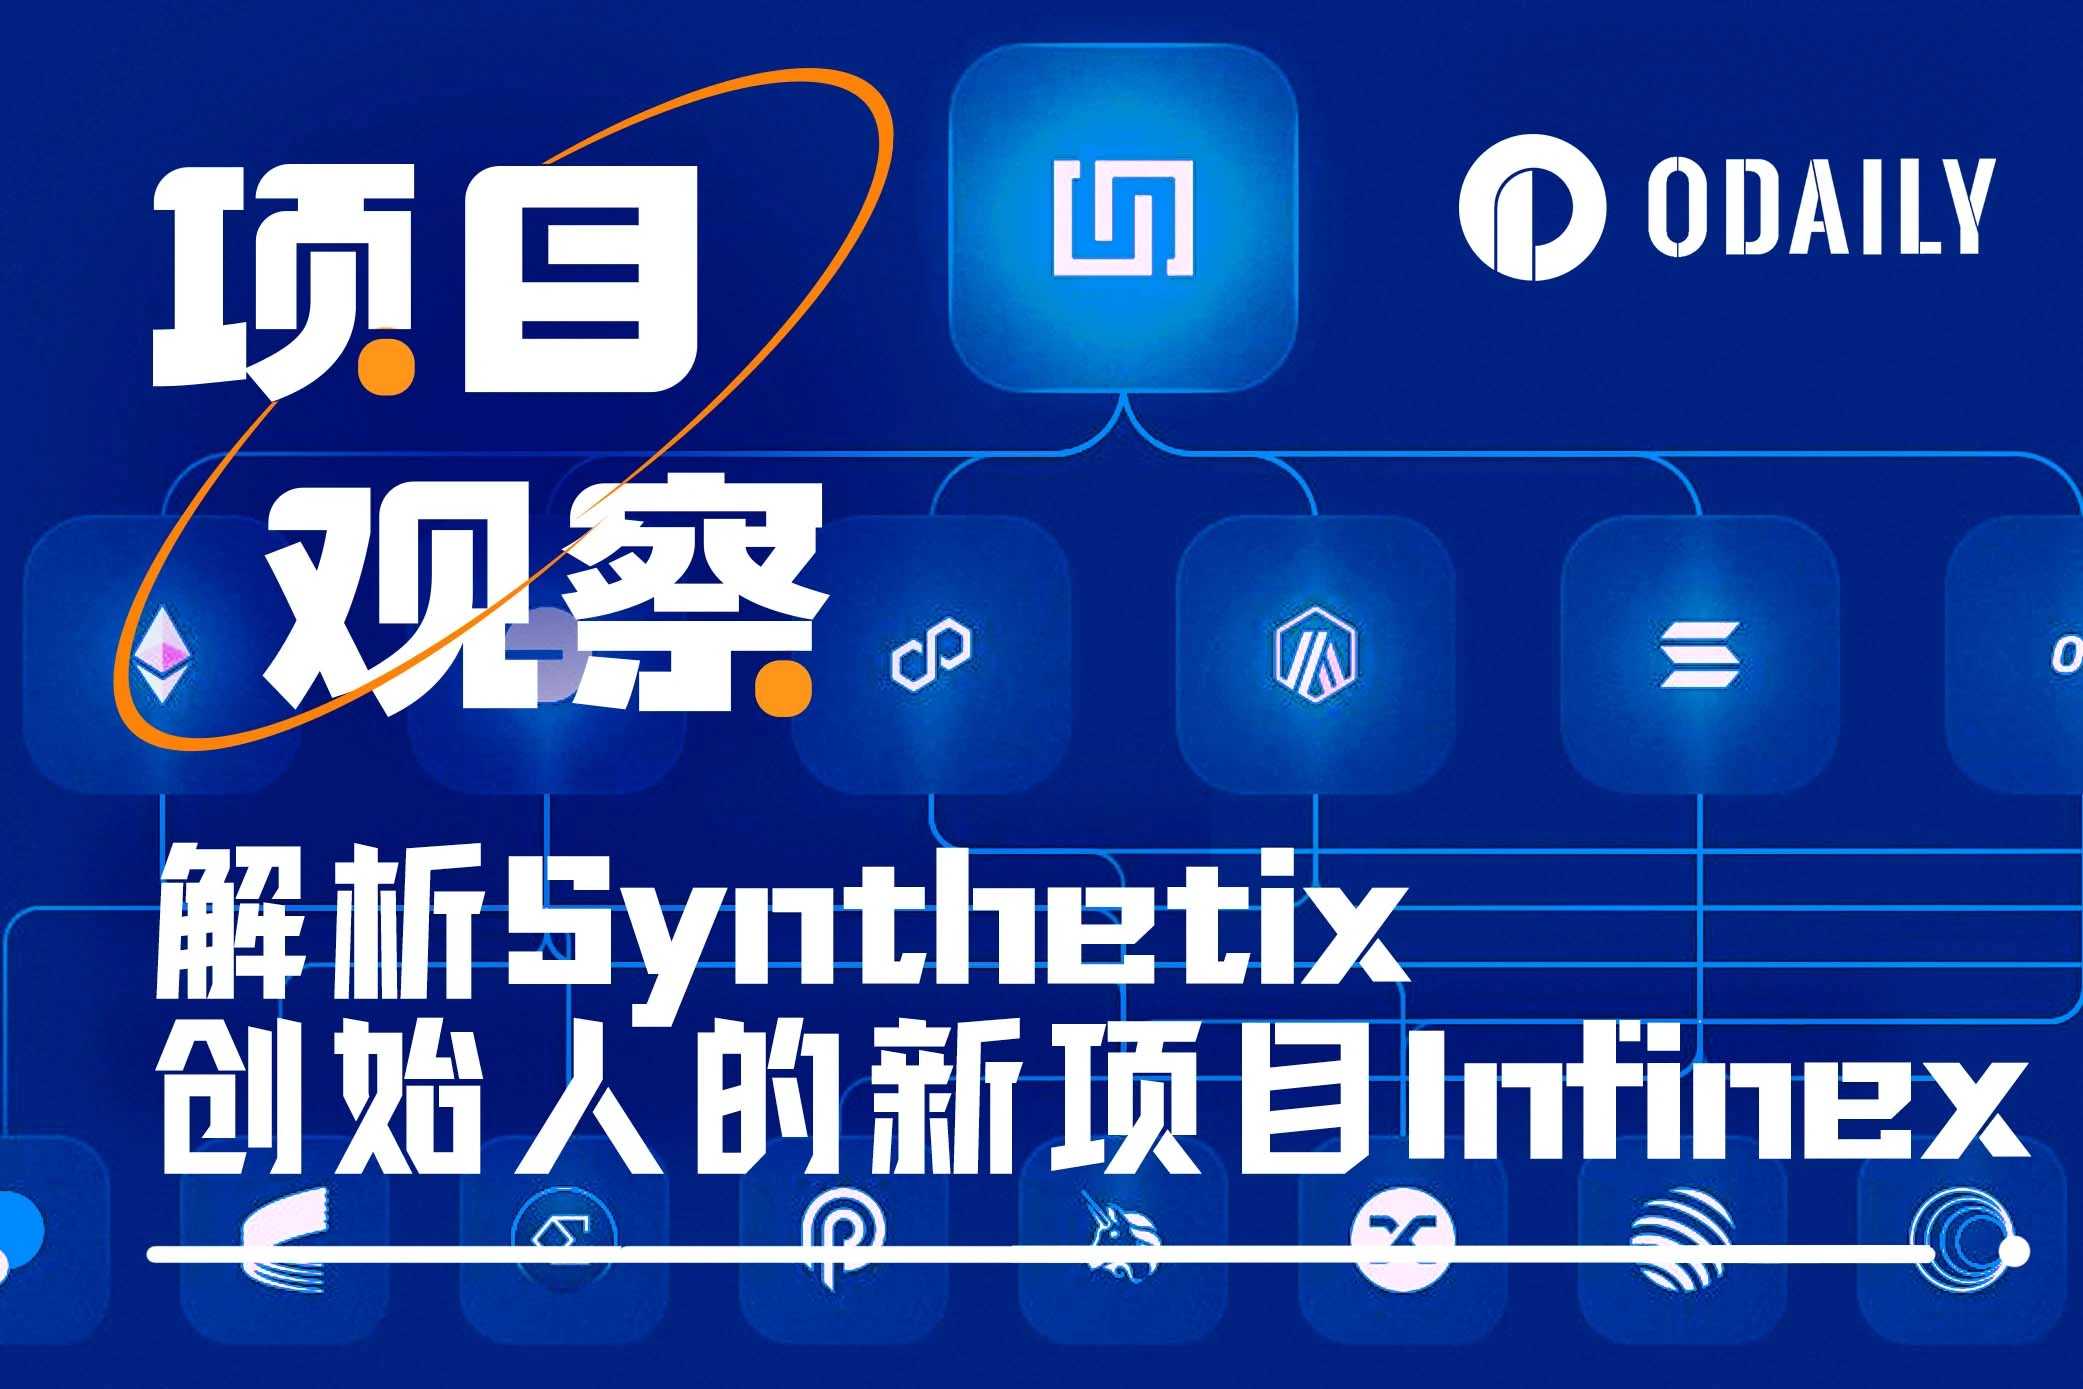 Infinex, the new project of Synthetix founder, attracted more than  million on the first day